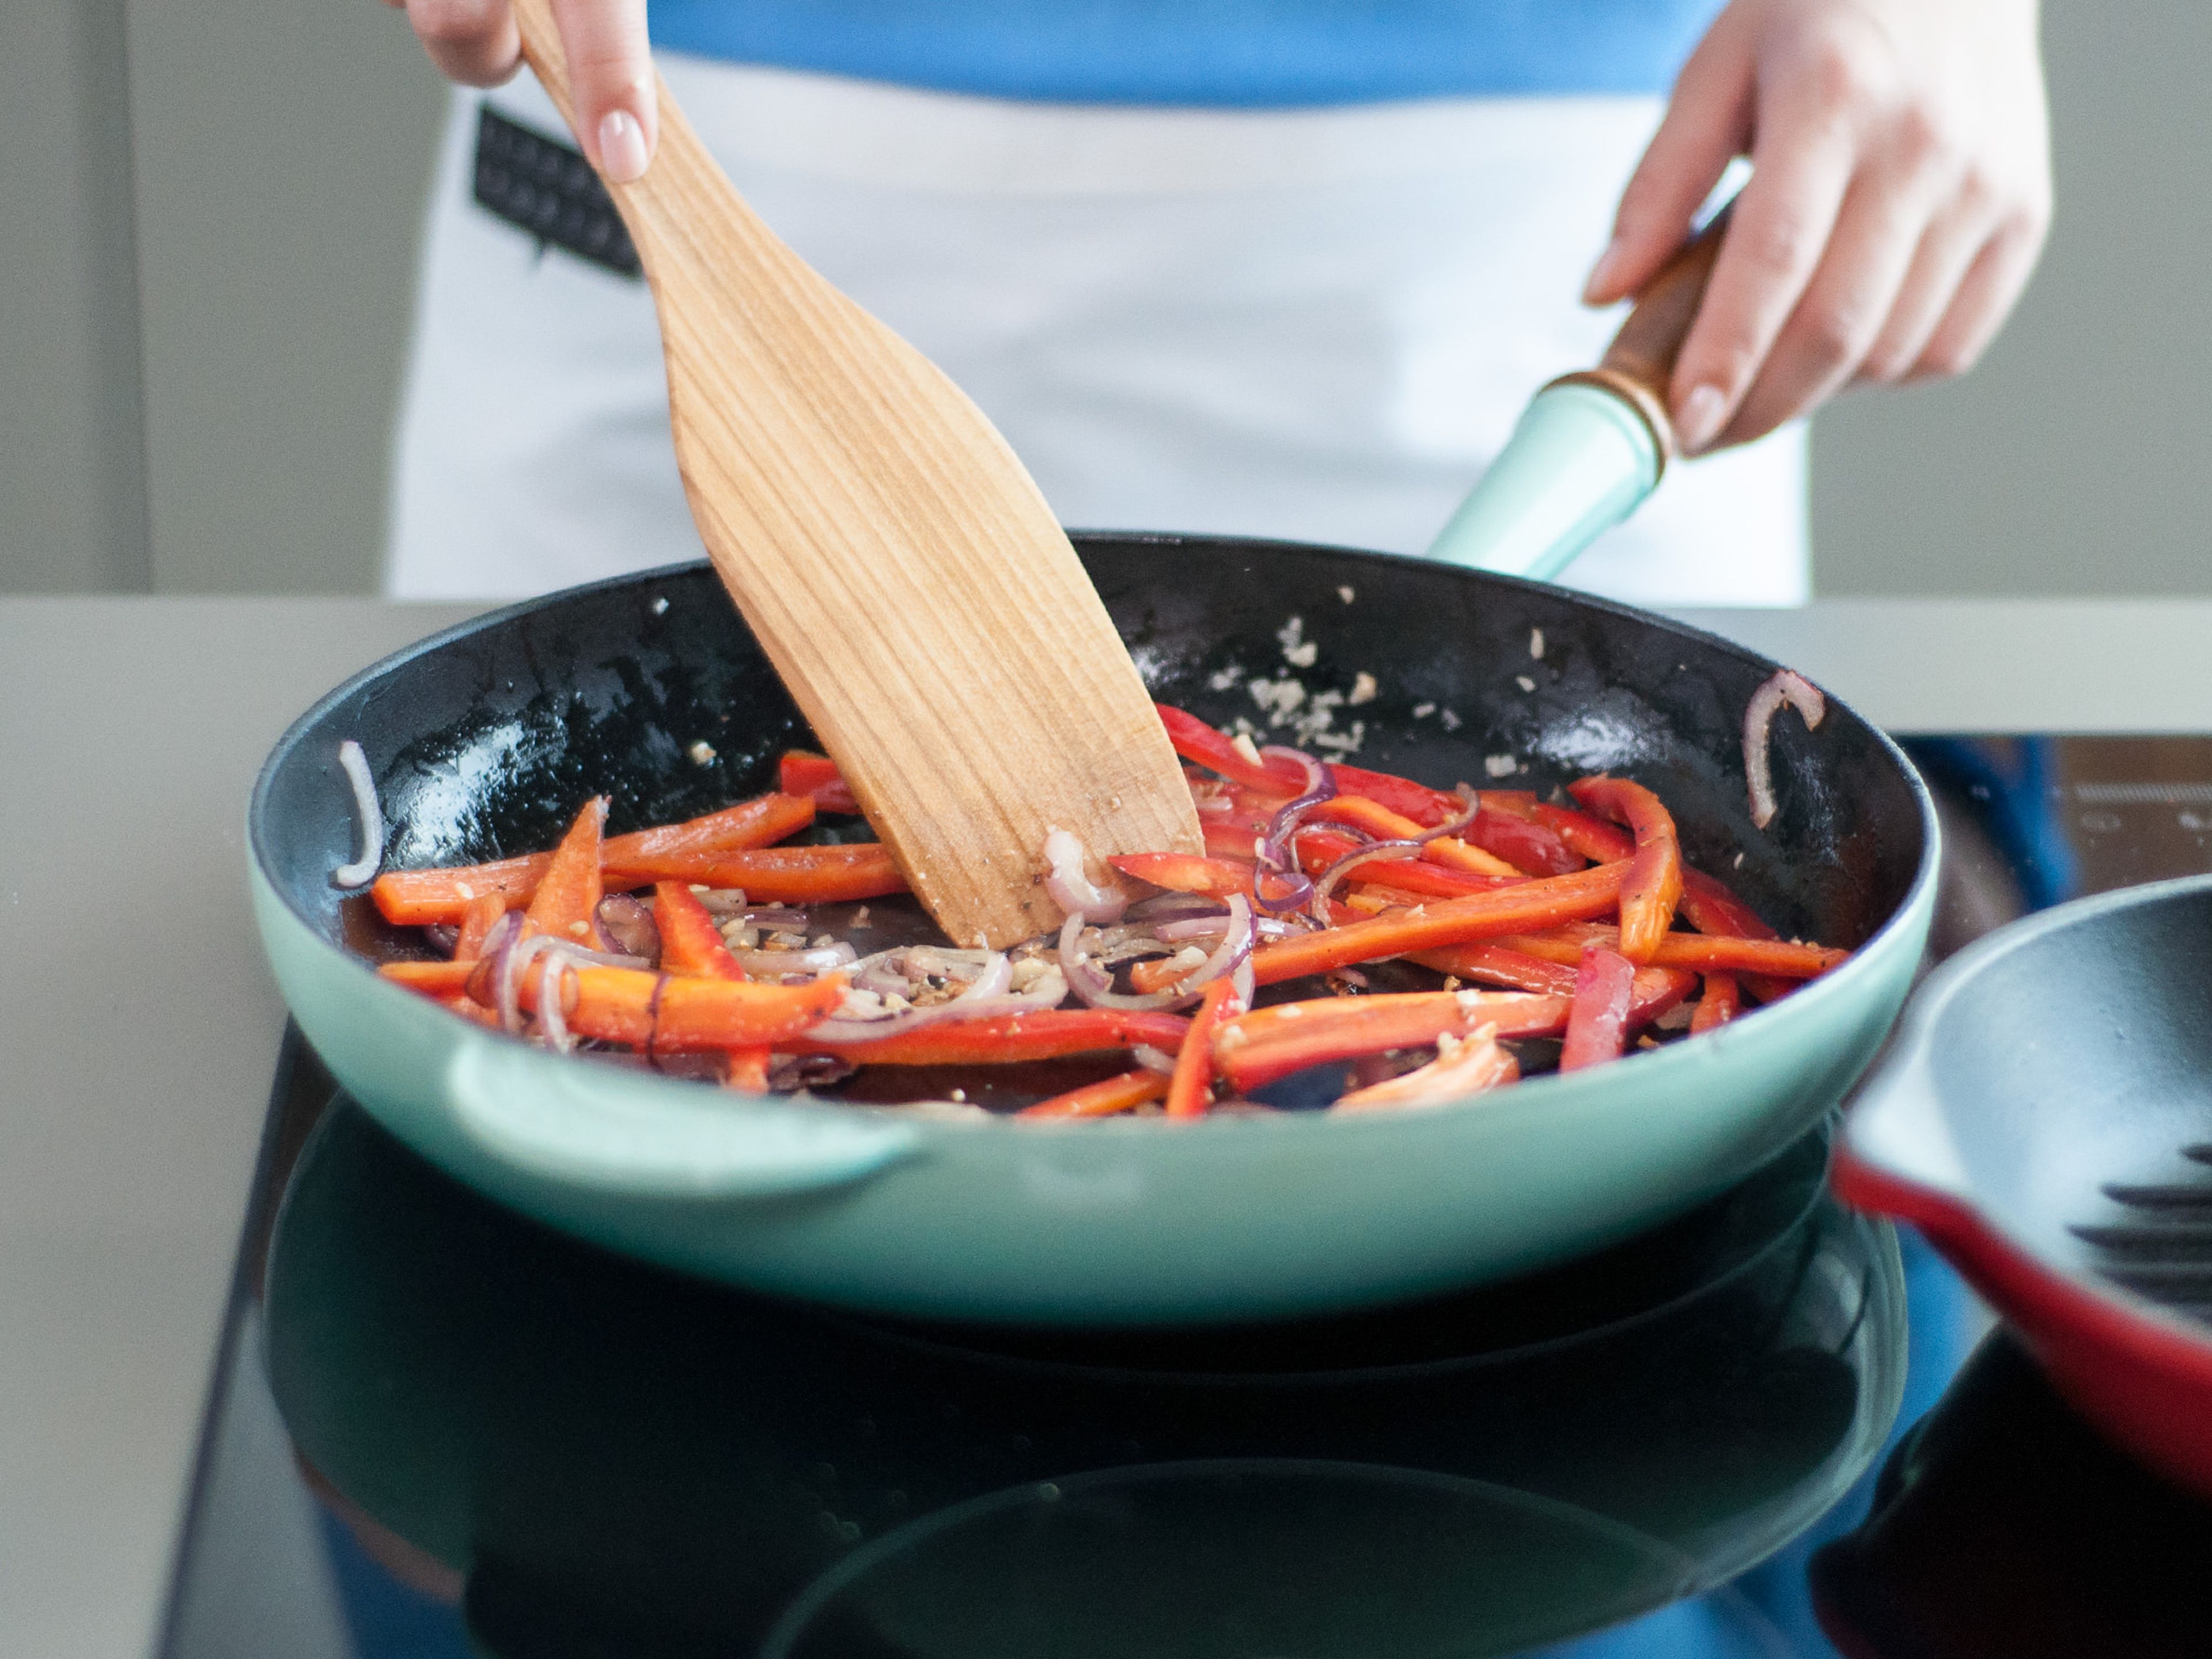 Heat some vegetable oil in a frying pan over medium-high heat. Add onion and garlic and sauté until translucent. Then add bell pepper and continue to sauté until the bell pepper has softened, approx. 5 – 7 min. Remove vegetables from the pan and set aside.